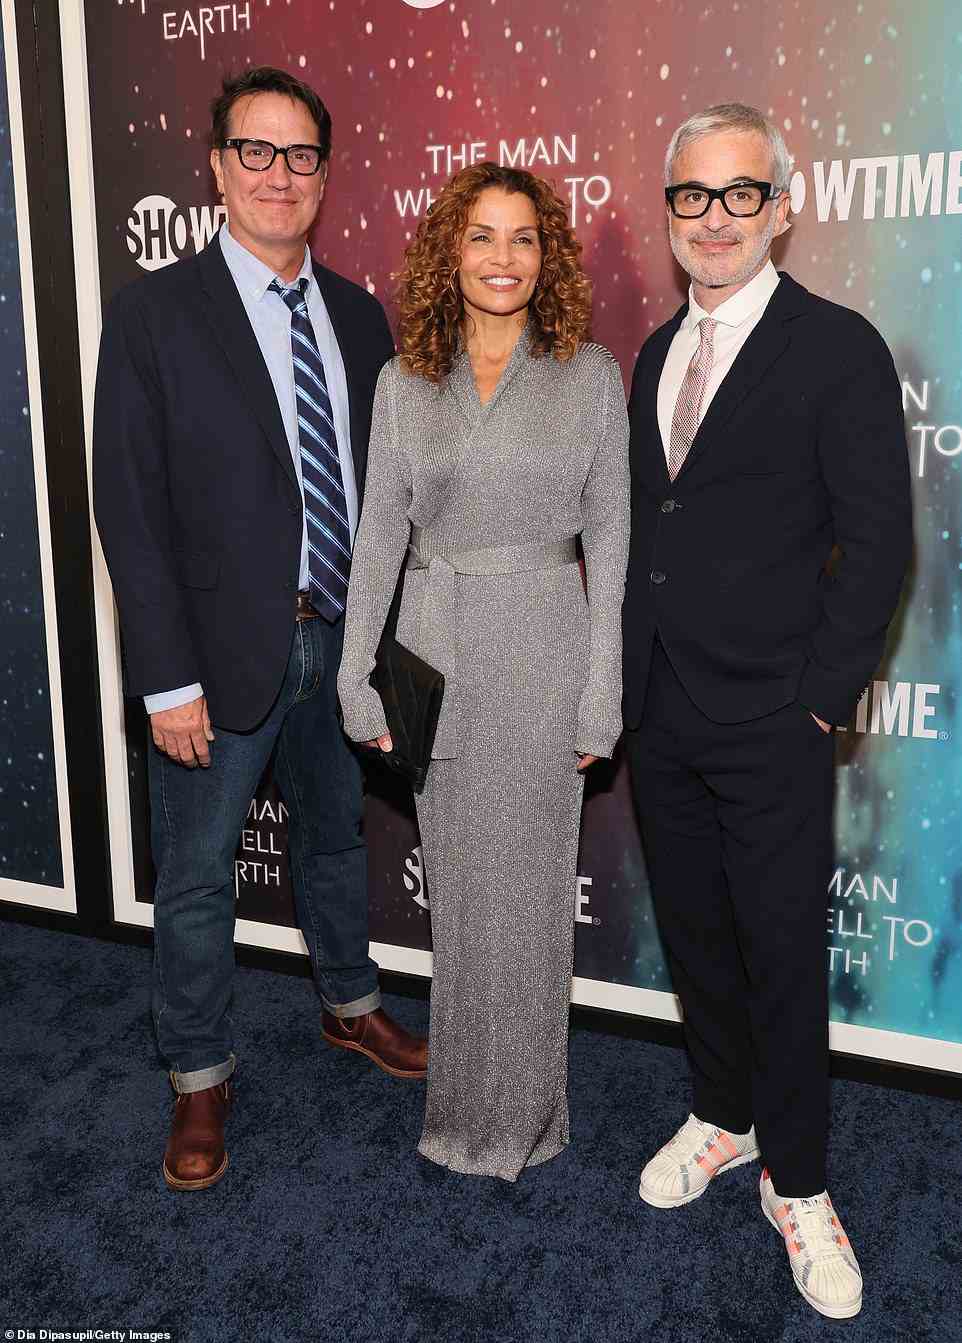 Showrunners: The Man Who Fell to Earth co-creators Jenny Lumet (M) and Alex Kurtzman (R) were joined for a picture with their executive producer John Hlavin (L)